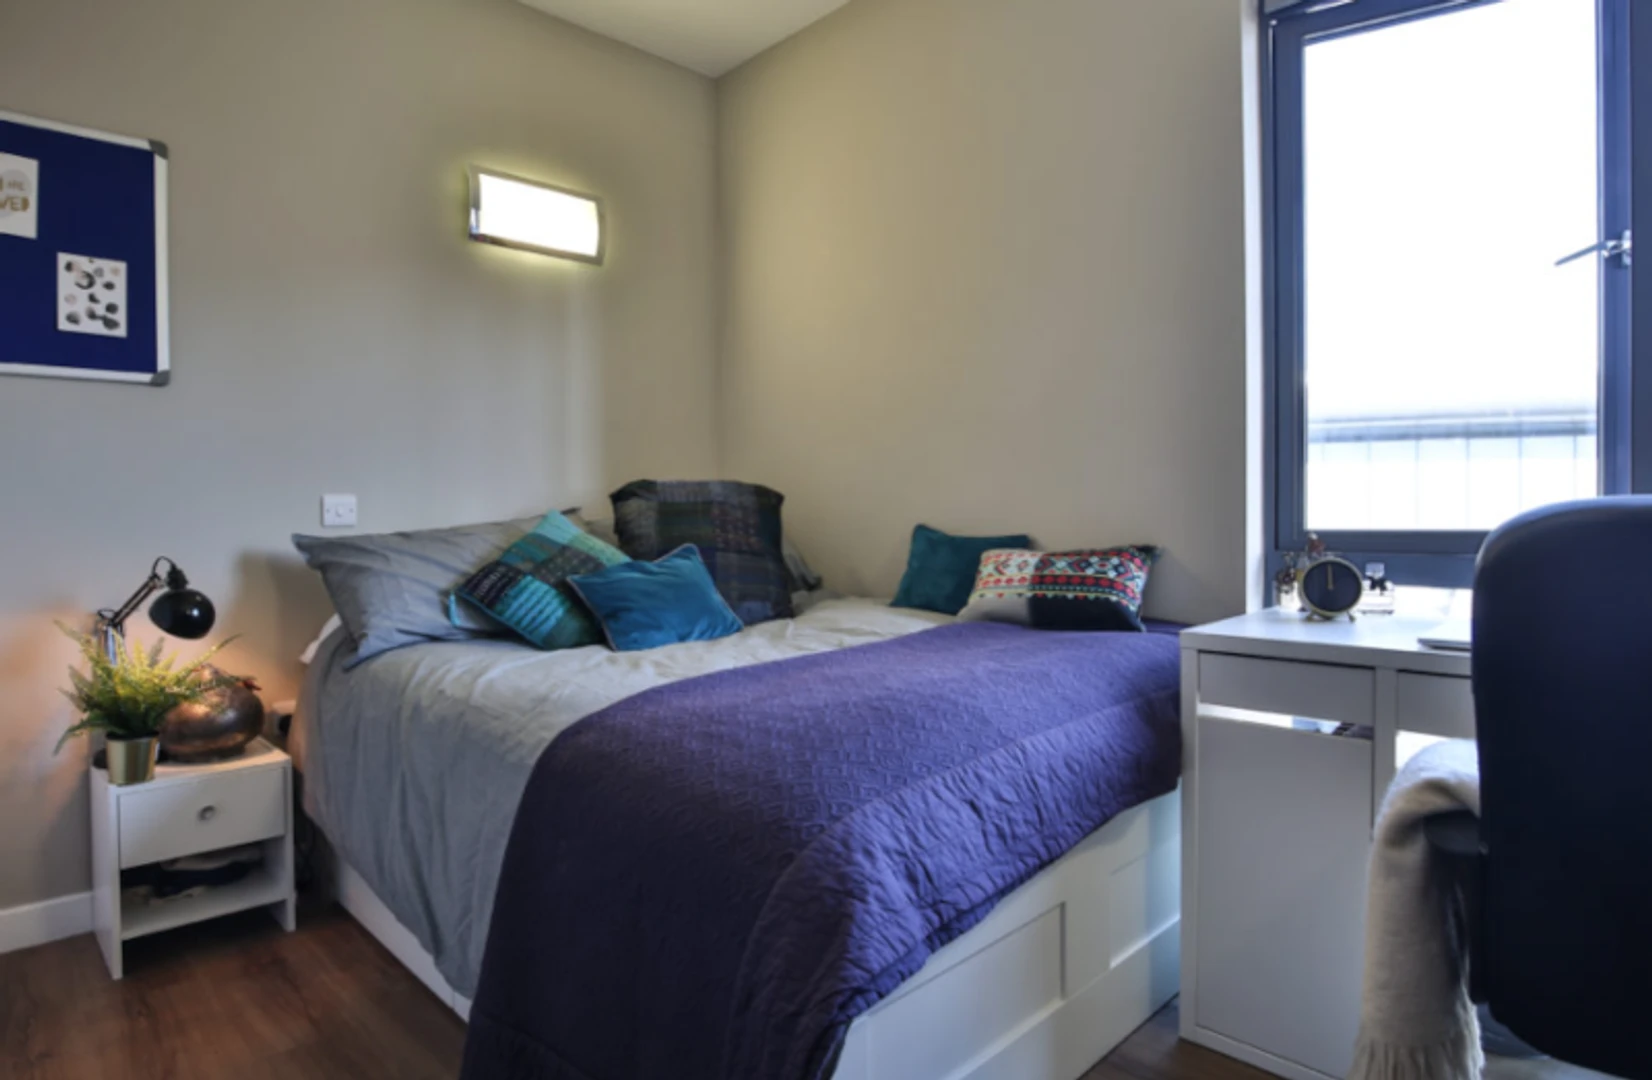 Renting rooms by the month in exeter